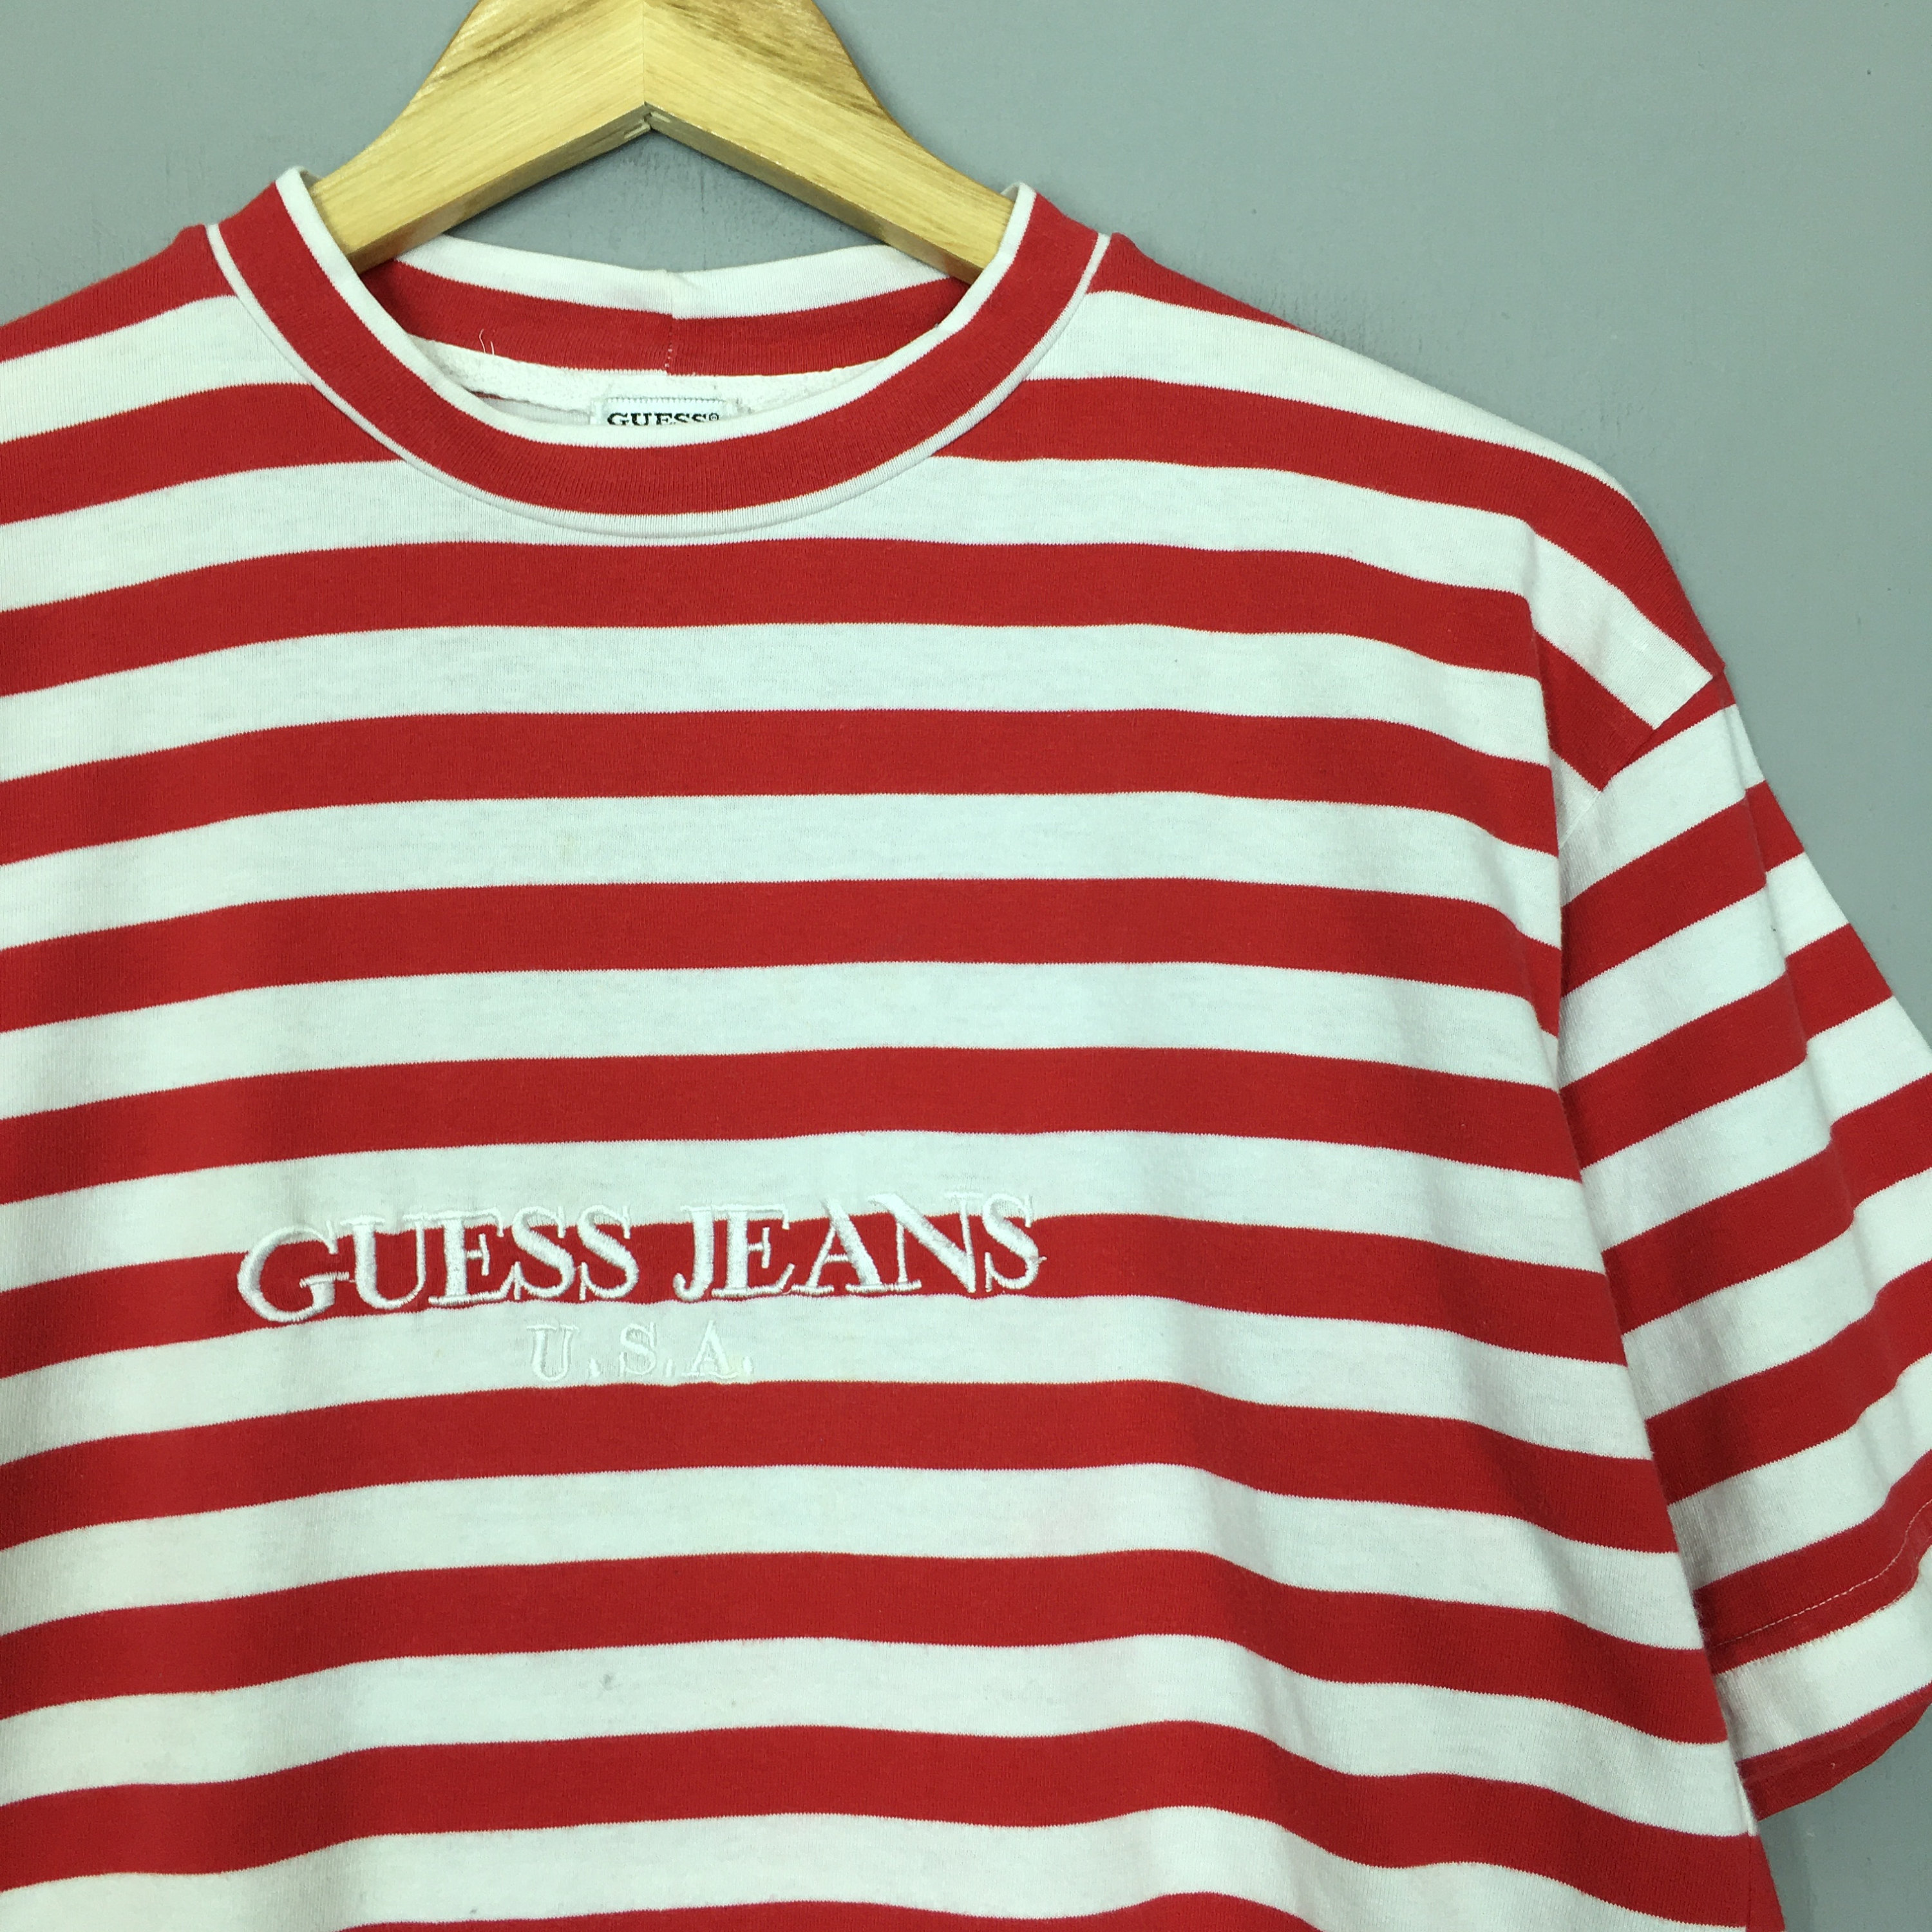 Vintage 90s Guess Jeans Striped T Shirt Small Jeans Usa Etsy